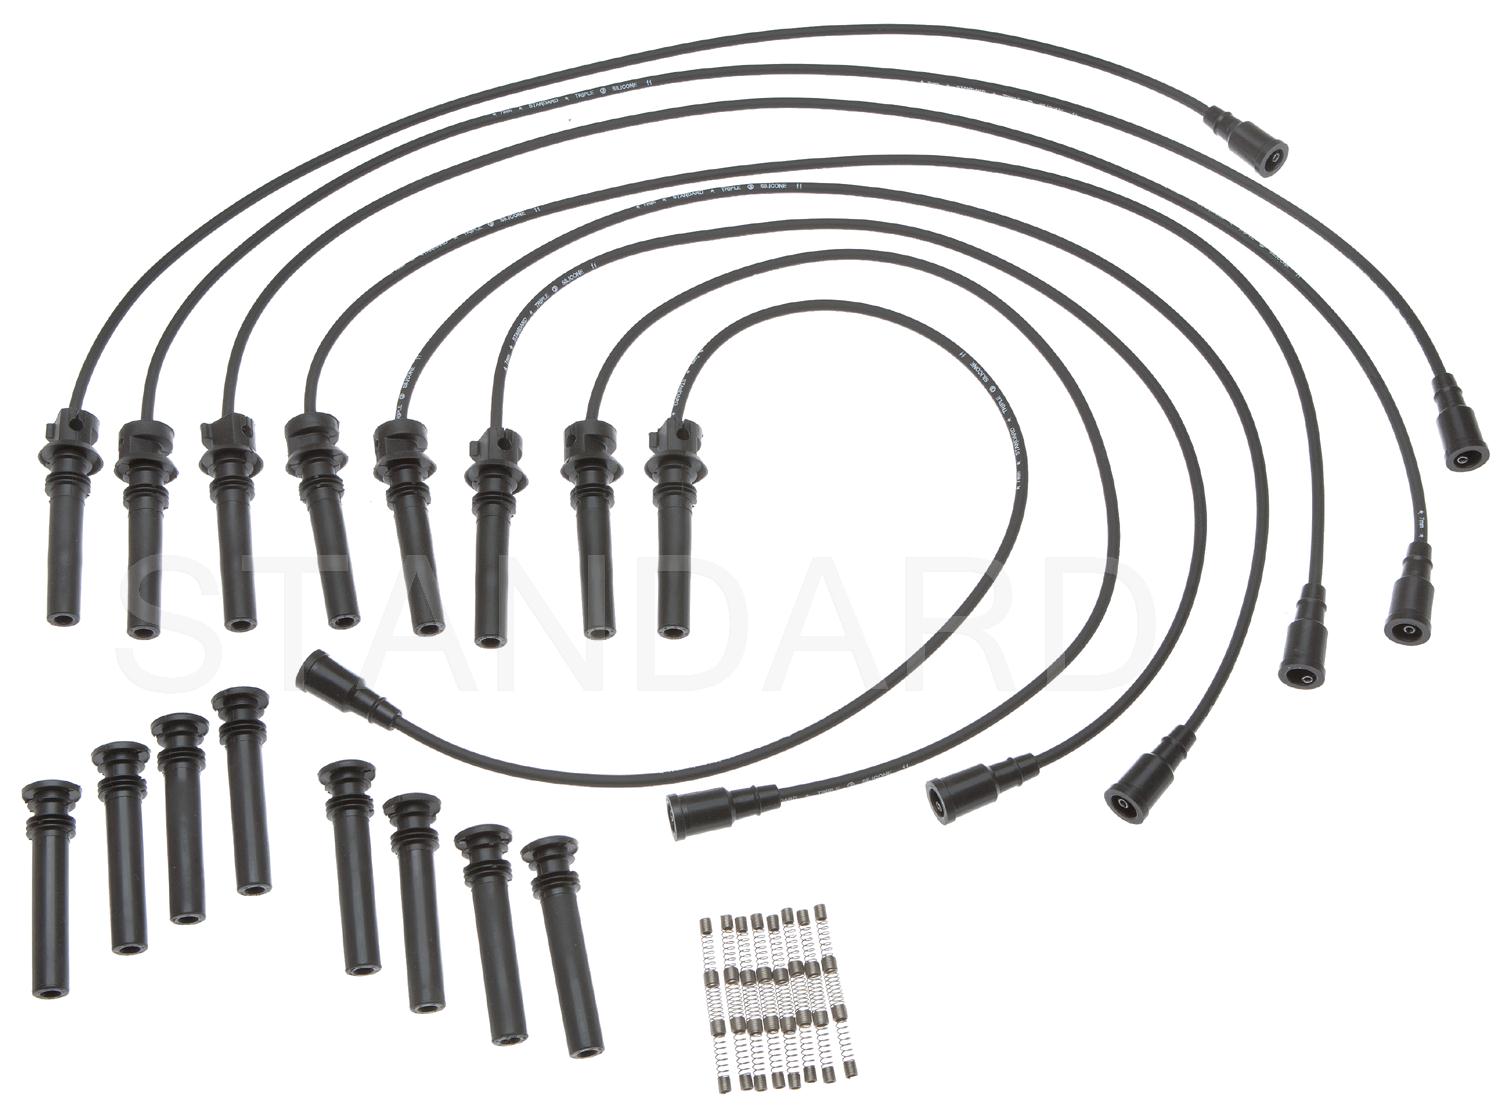 Spark Plug Wire Set fits 2005-2005 Jeep Grand Cherokee STANDARD MOTOR PRODUCTS 2005 Jeep Grand Cherokee Spark Plug Wires